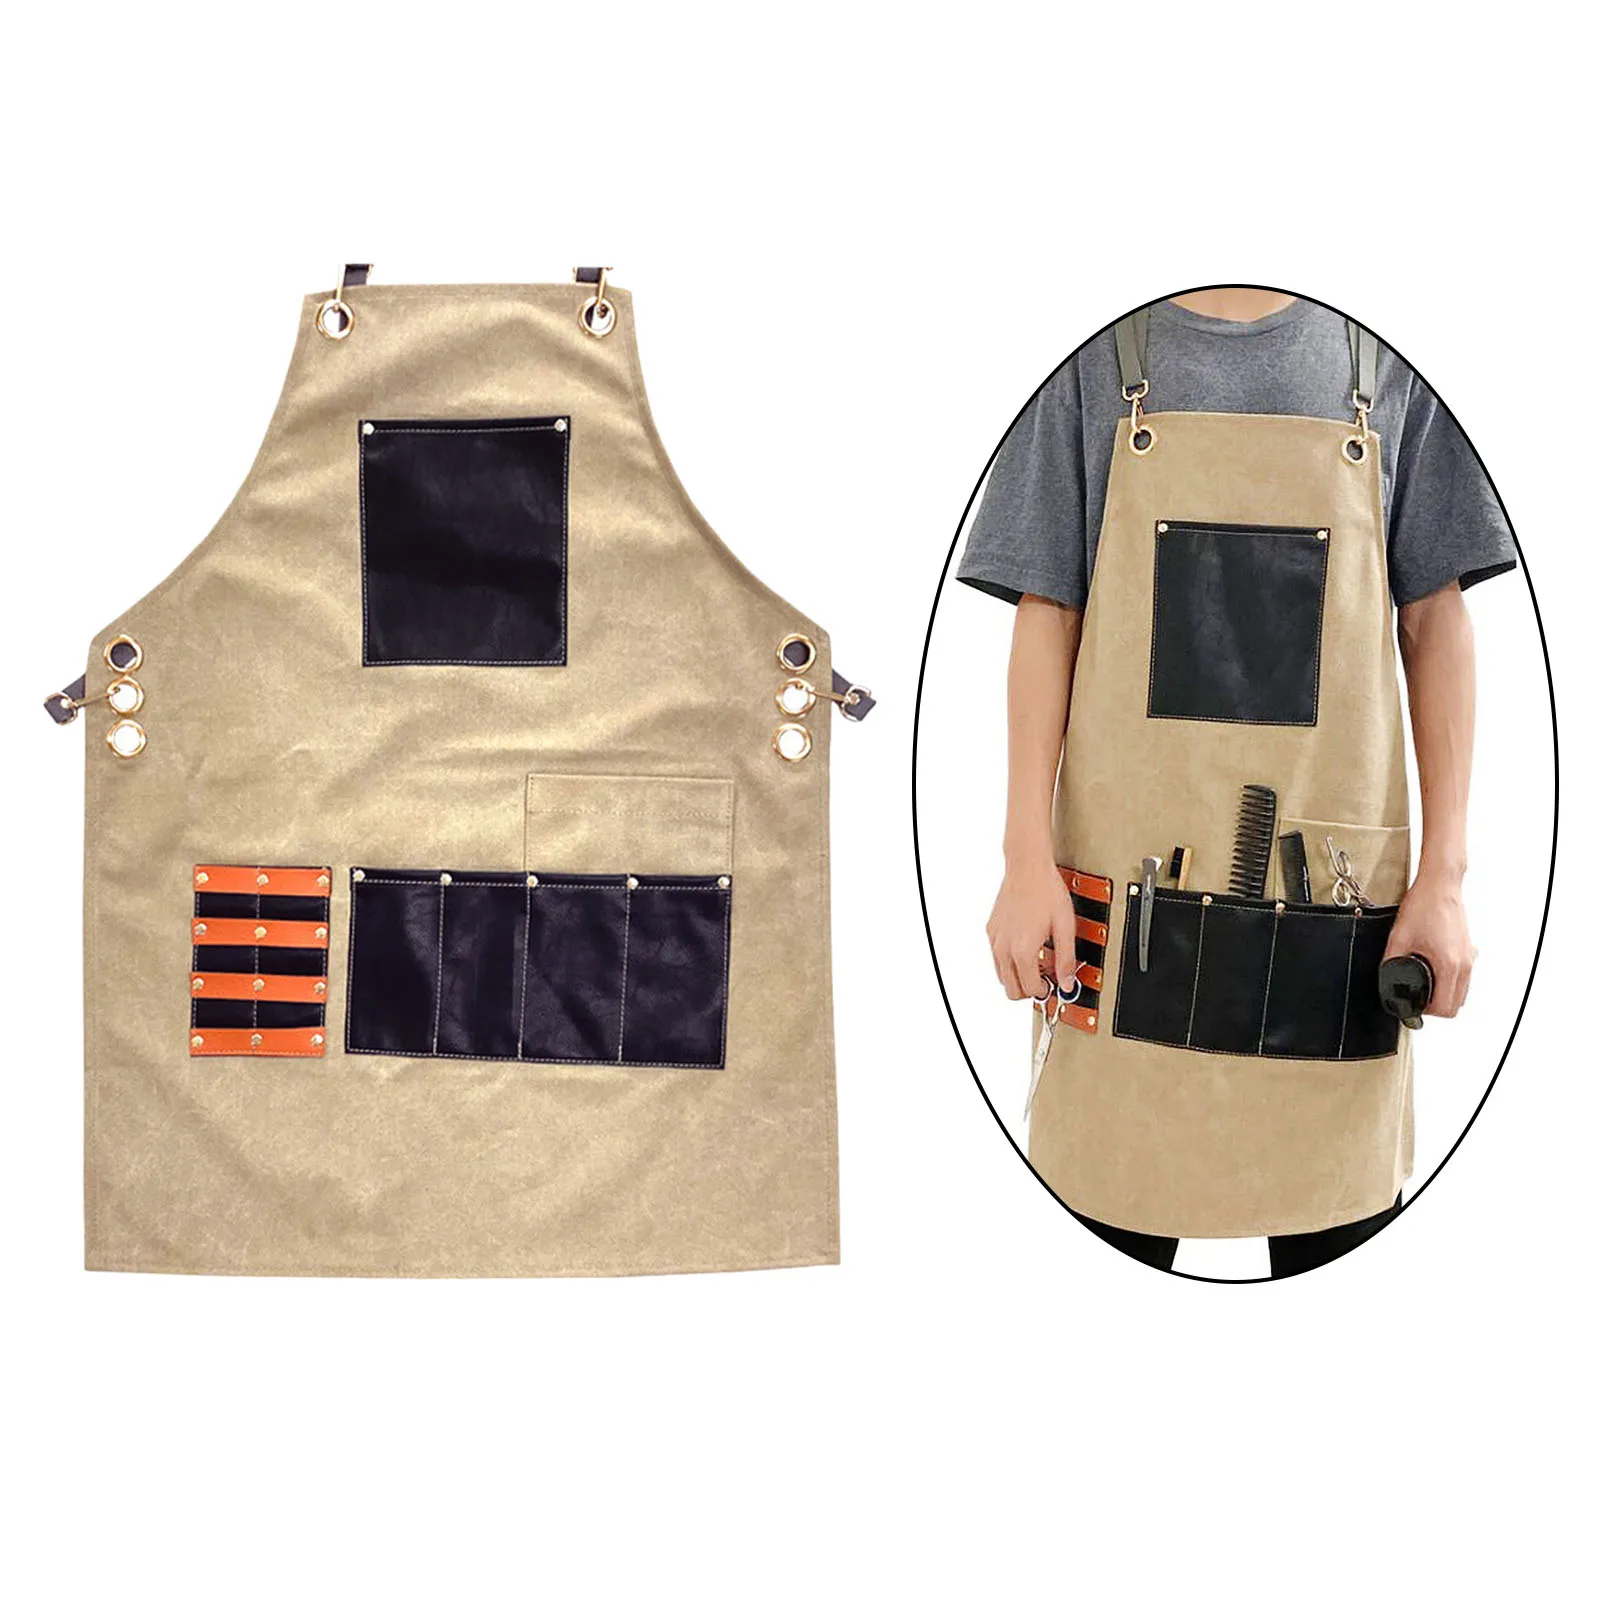 Professional Hair Cutting Hairdressing Barber Apron w/ Pockets Cover for Barber Hairstylist Artist Cloth Craft